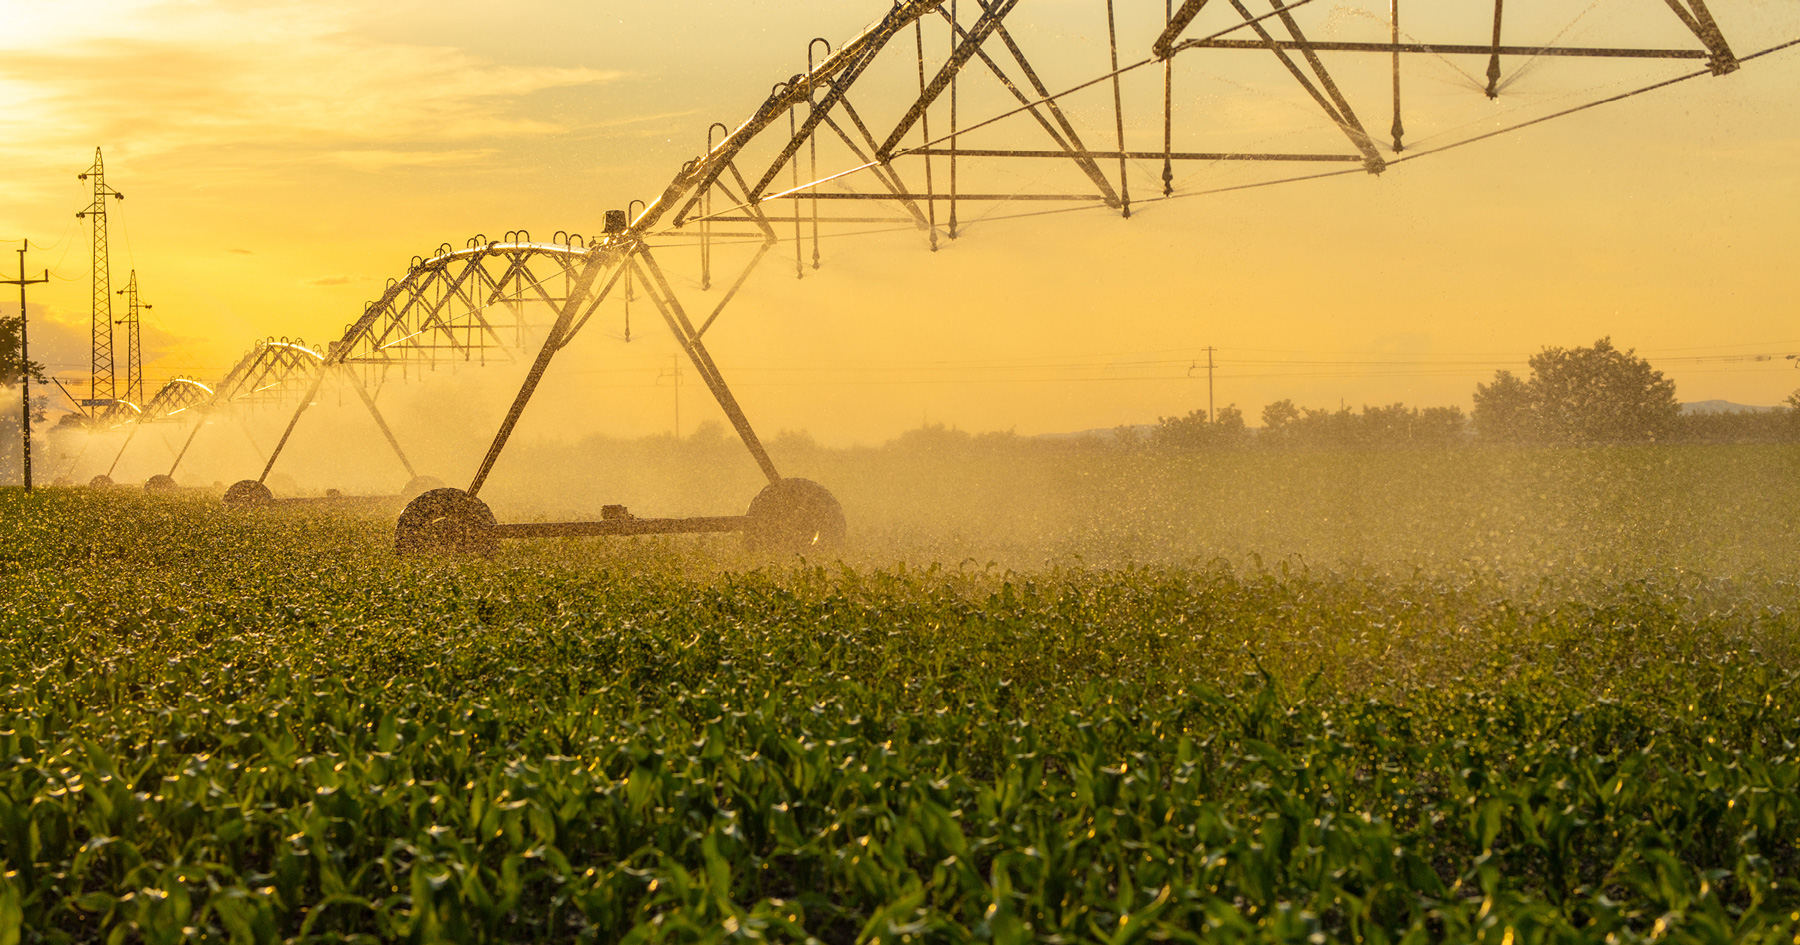 irrigation system spraying crops with water in Indiana